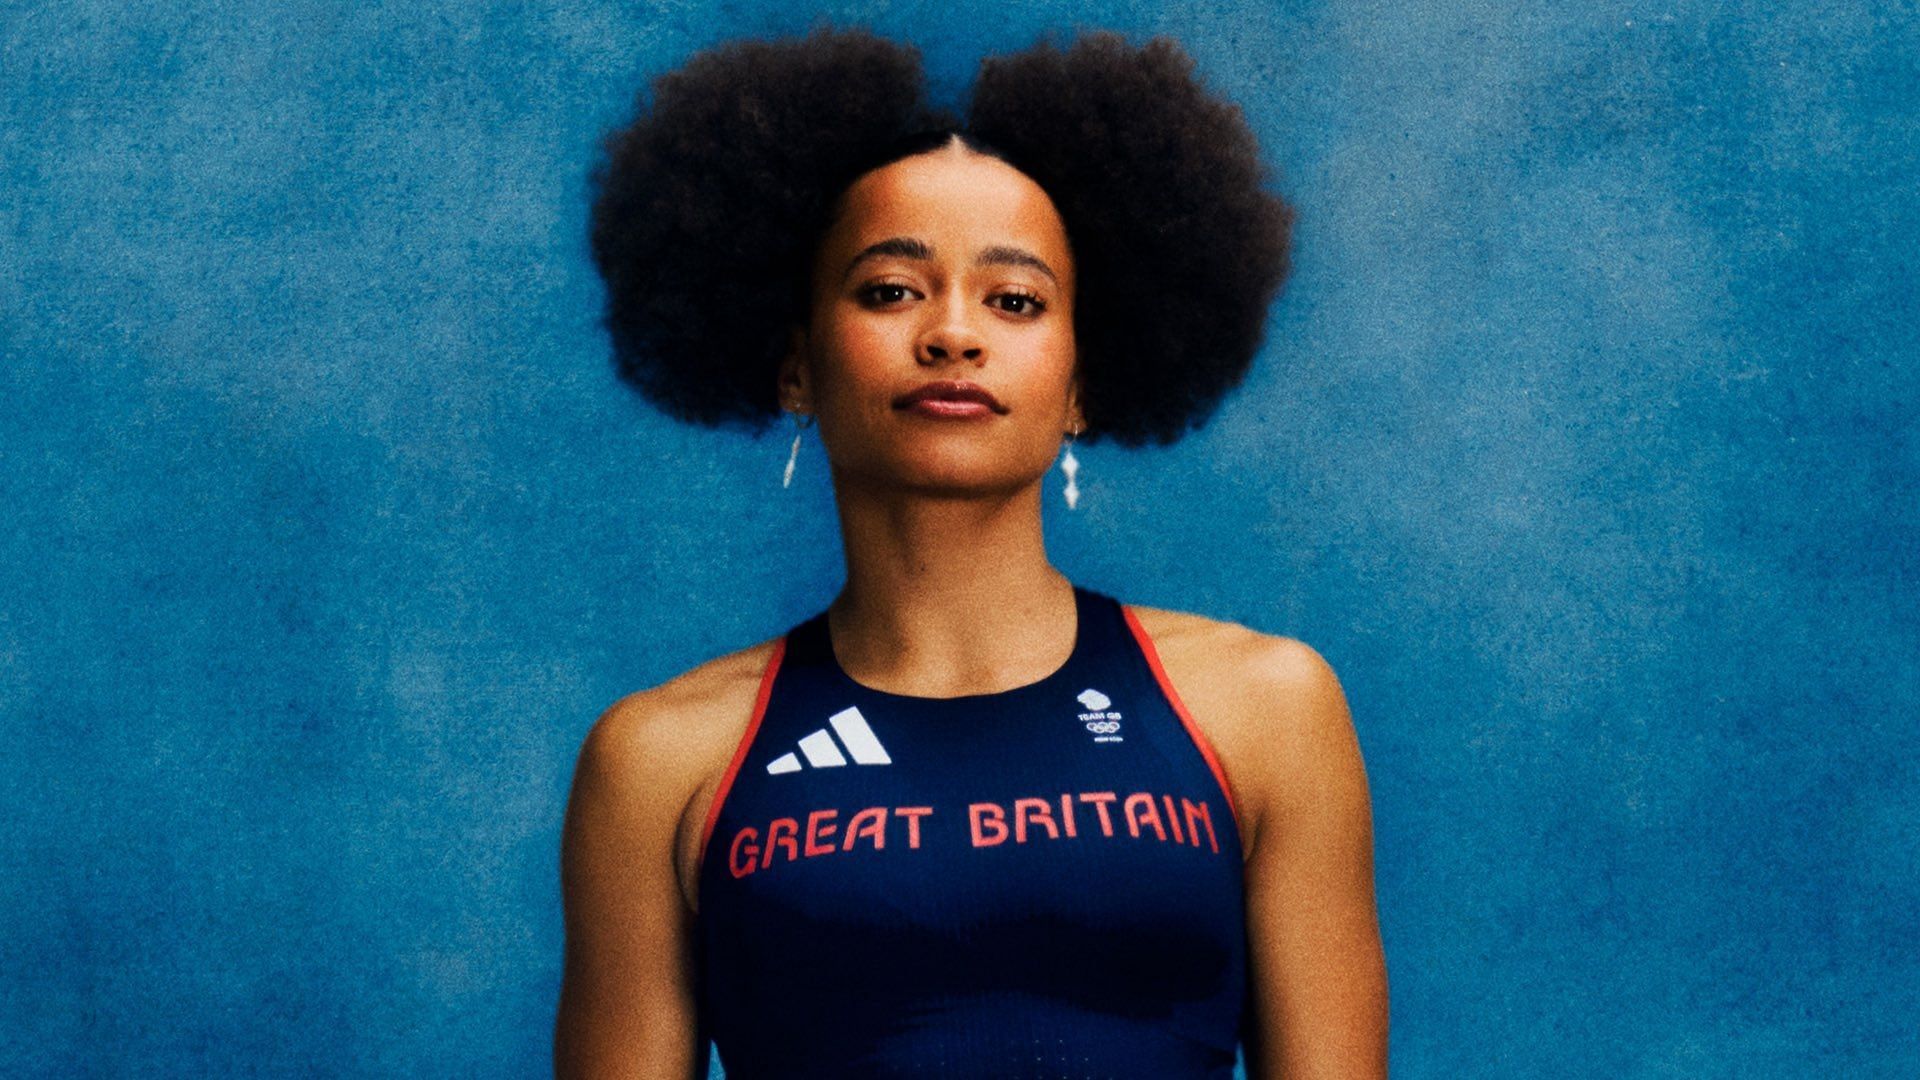 Adidas new kit for Great Britain team 